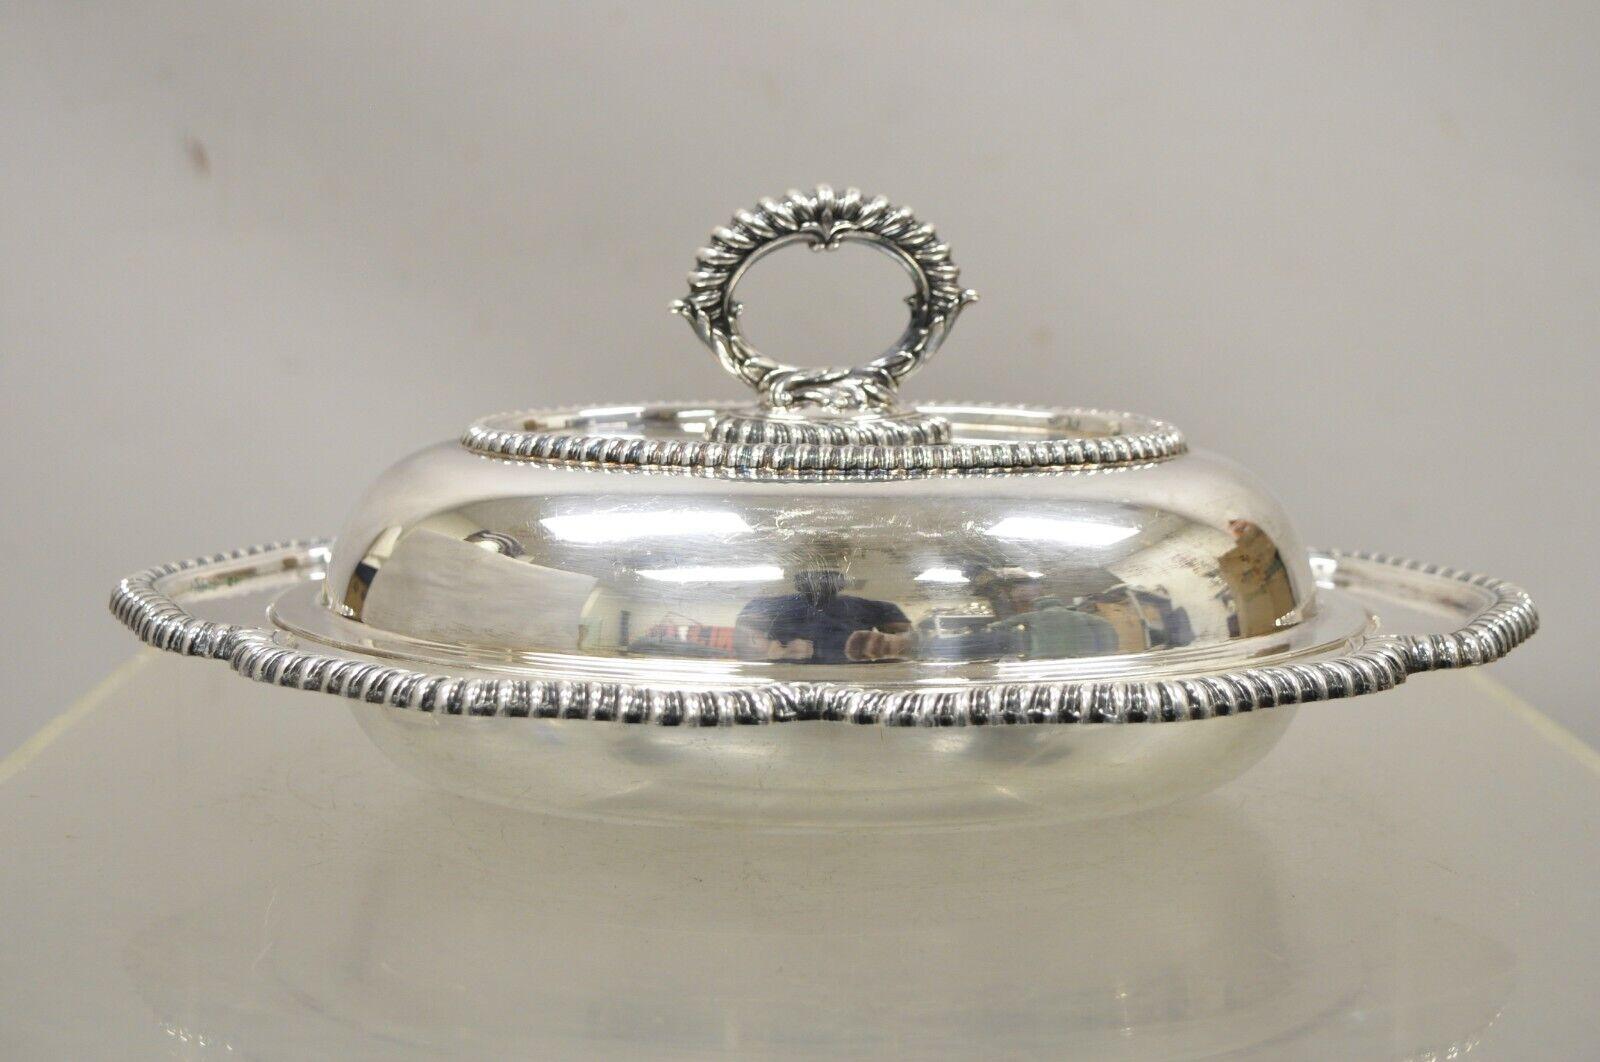 Vintage English Victorian Silver Plated Oval Lidded Vegetable Serving Platter Dish. Item featured has a nice oval form, ornate handle, very nice vintage item, great style and form. Circa Early to Mid 20th Century. Measurements: 5.5